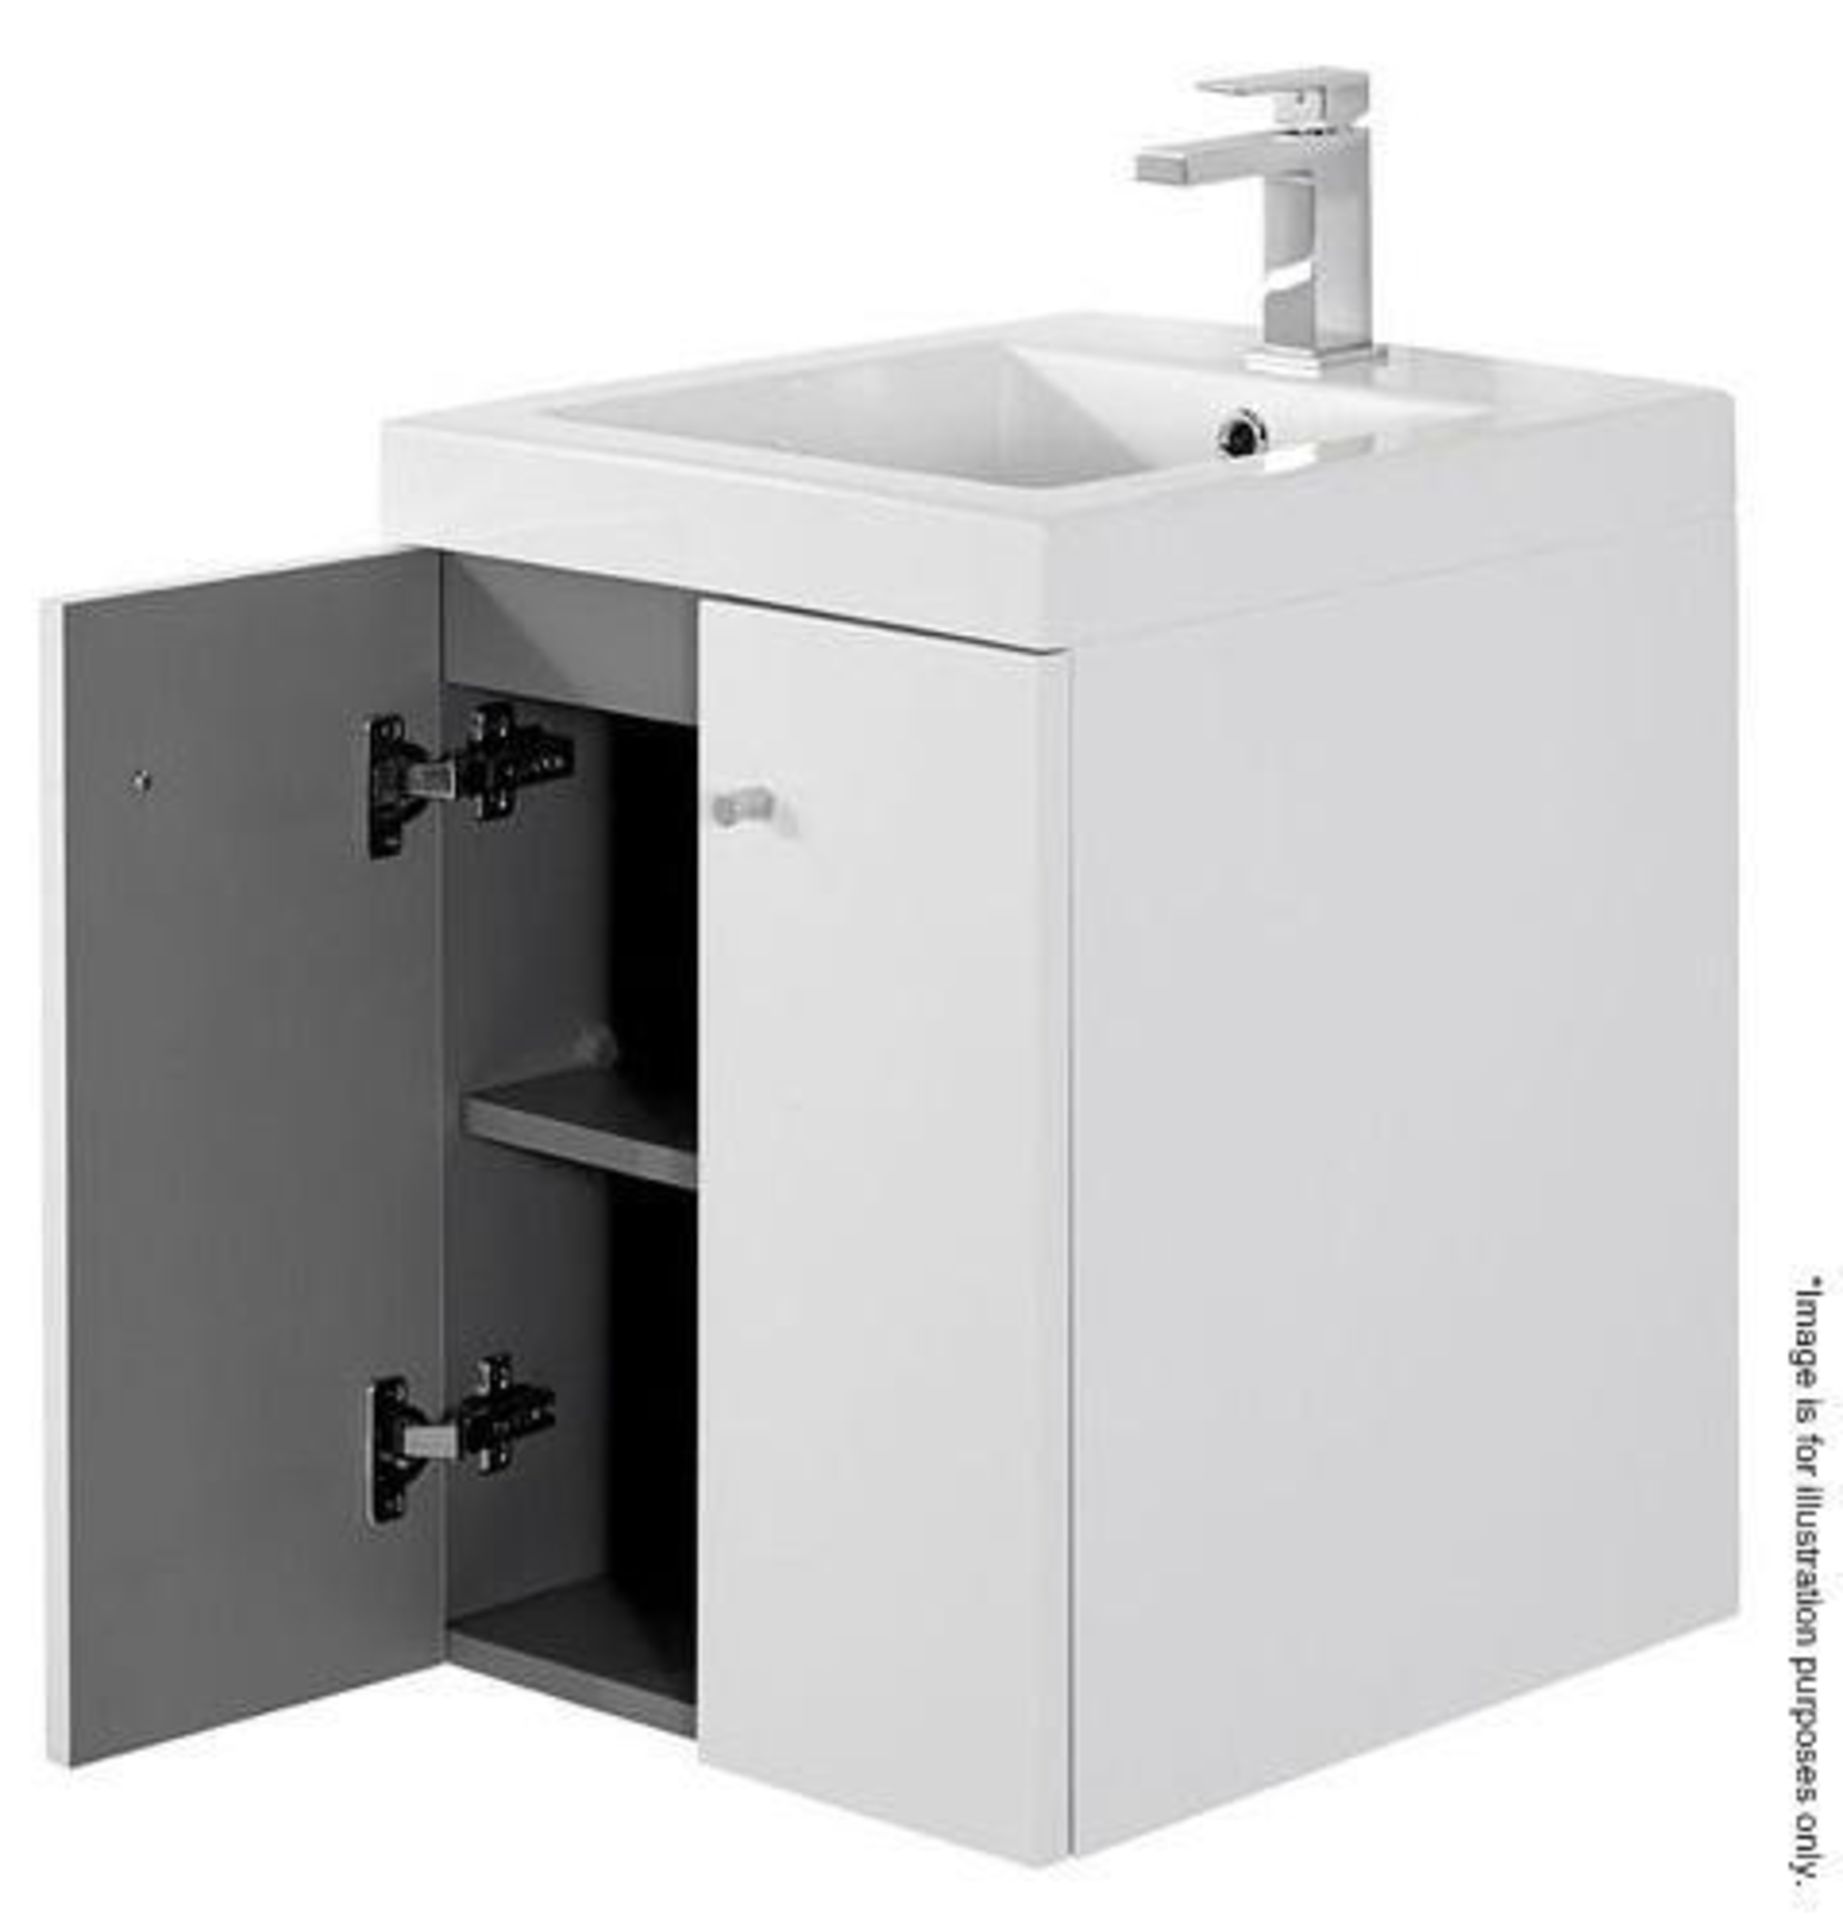 10 x Alpine Duo 400 Wall Hung Vanity Units In Gloss White - Brand New Boxed Stock - Dimensions: H49 - Image 2 of 5